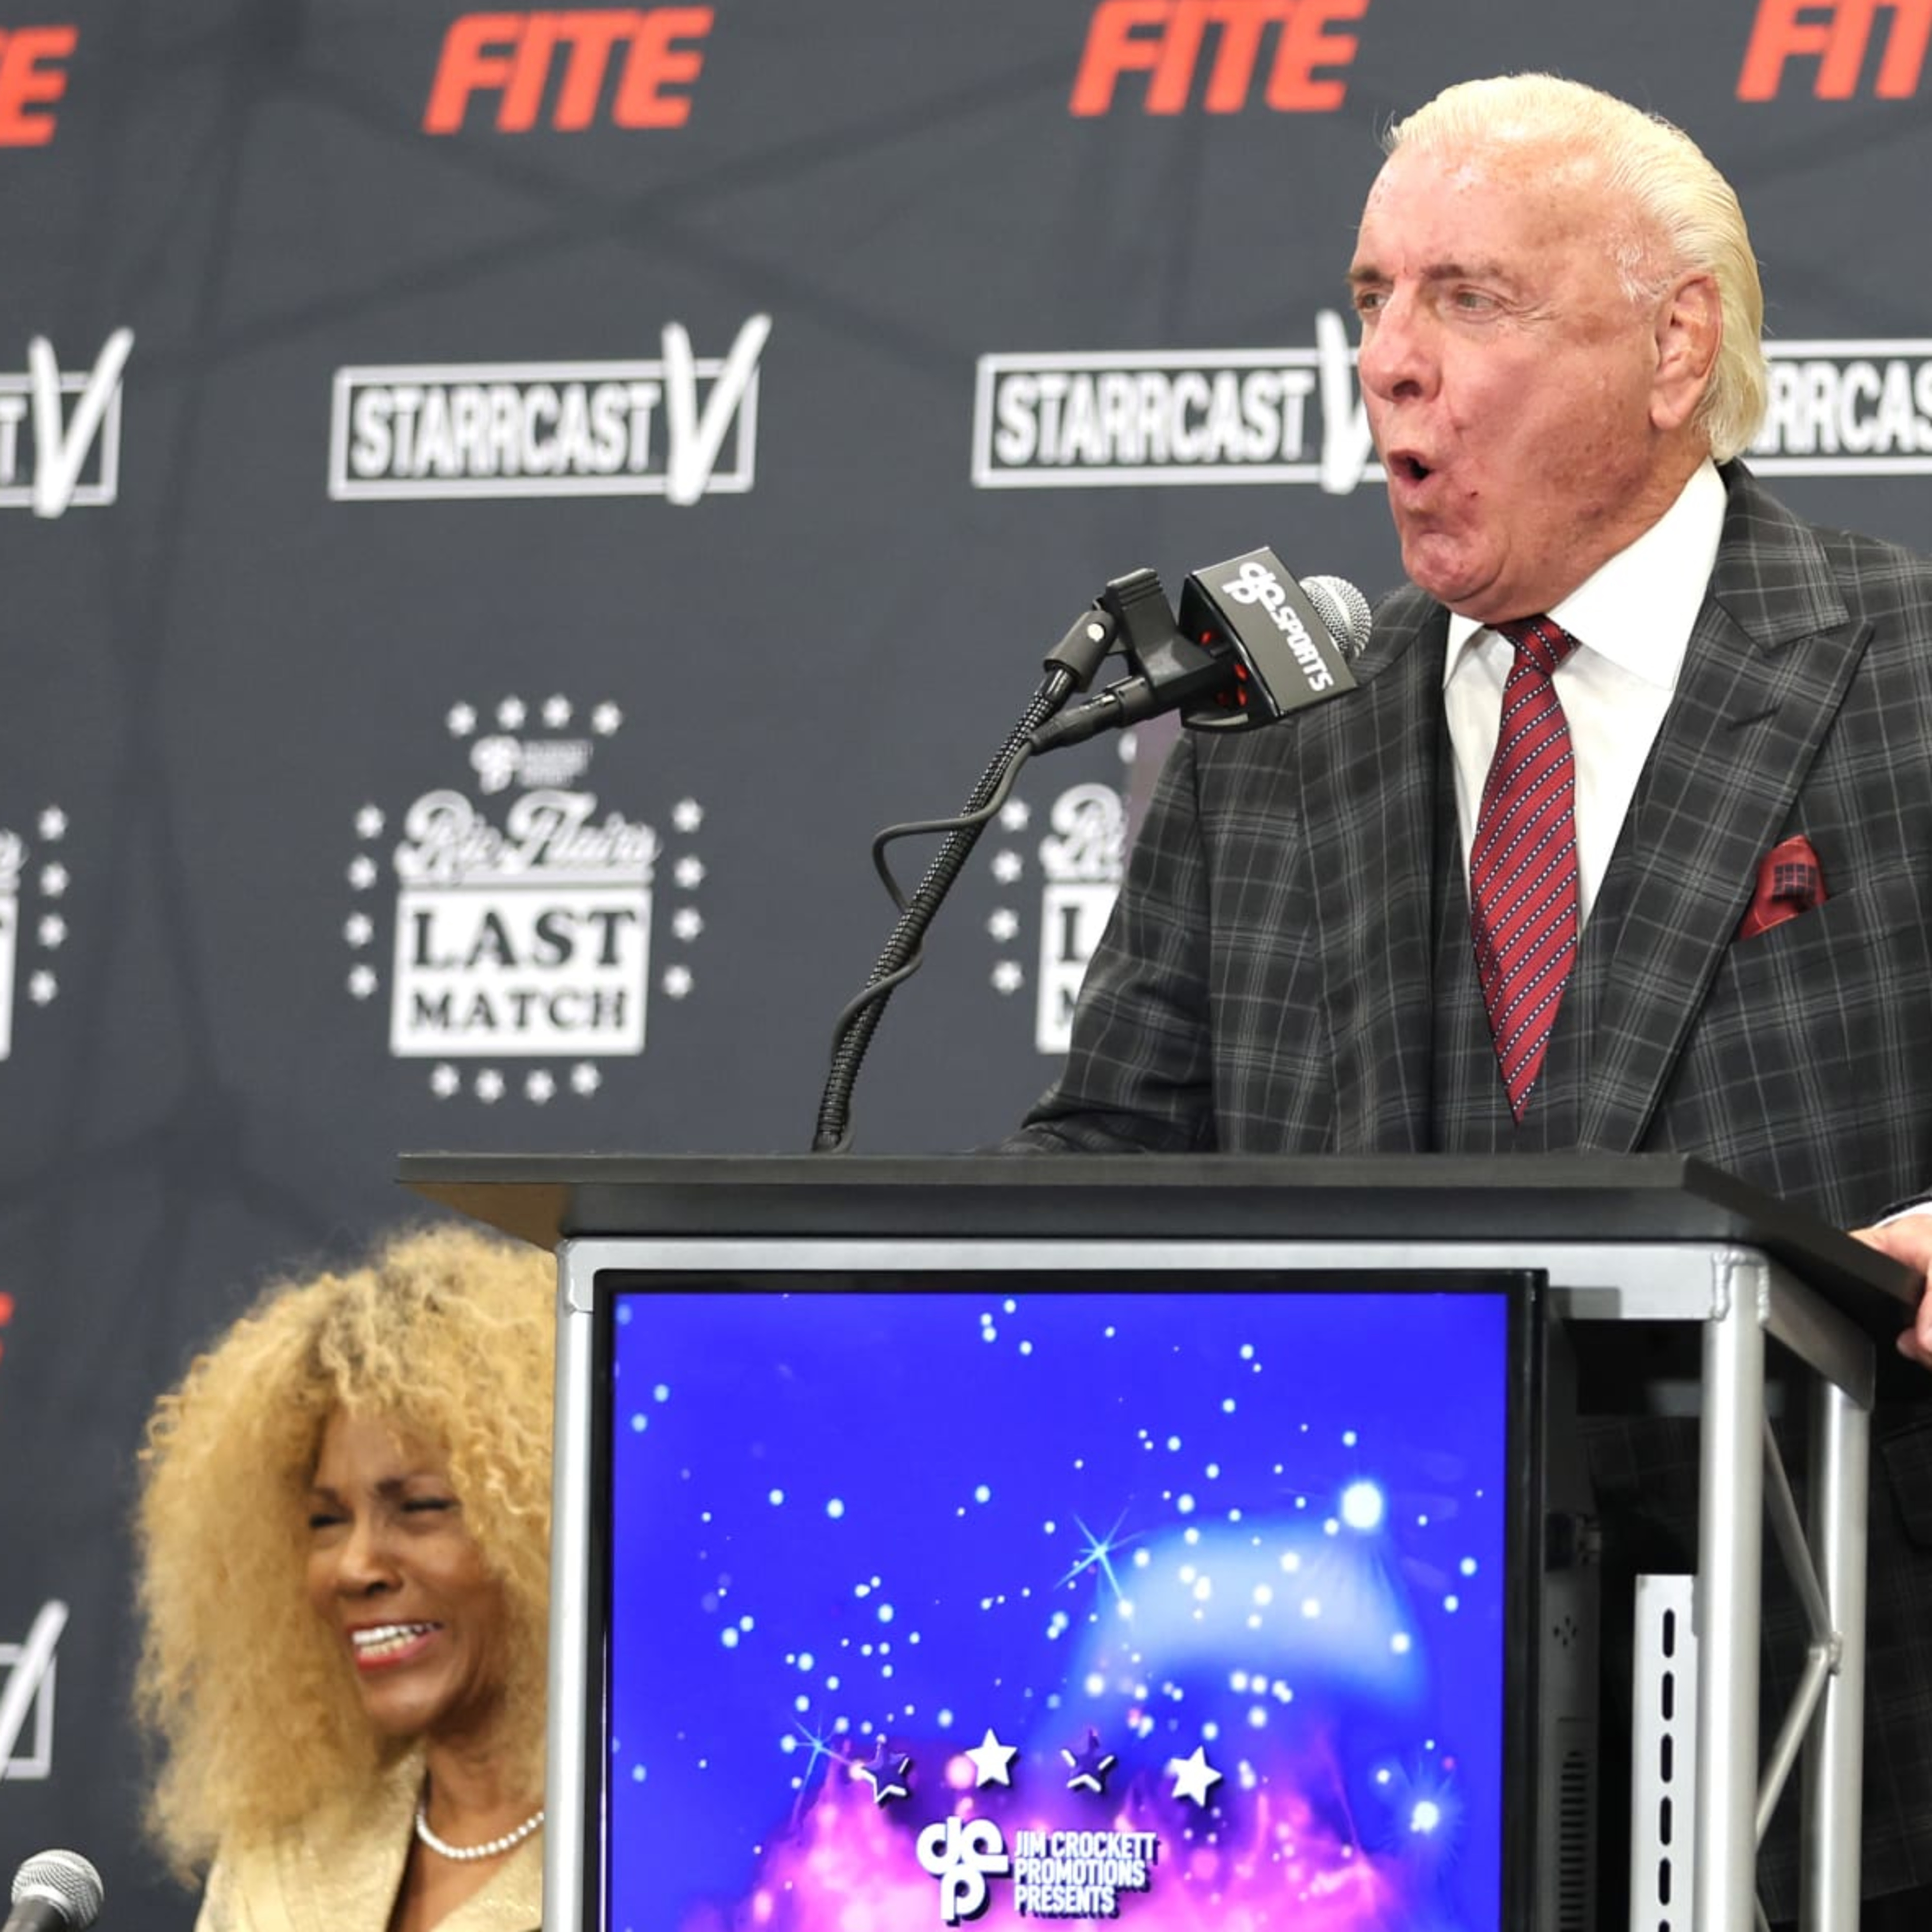 WWE Legend Ric Flair to Face Jeff Jarrett, Jay Lethal in Final Match